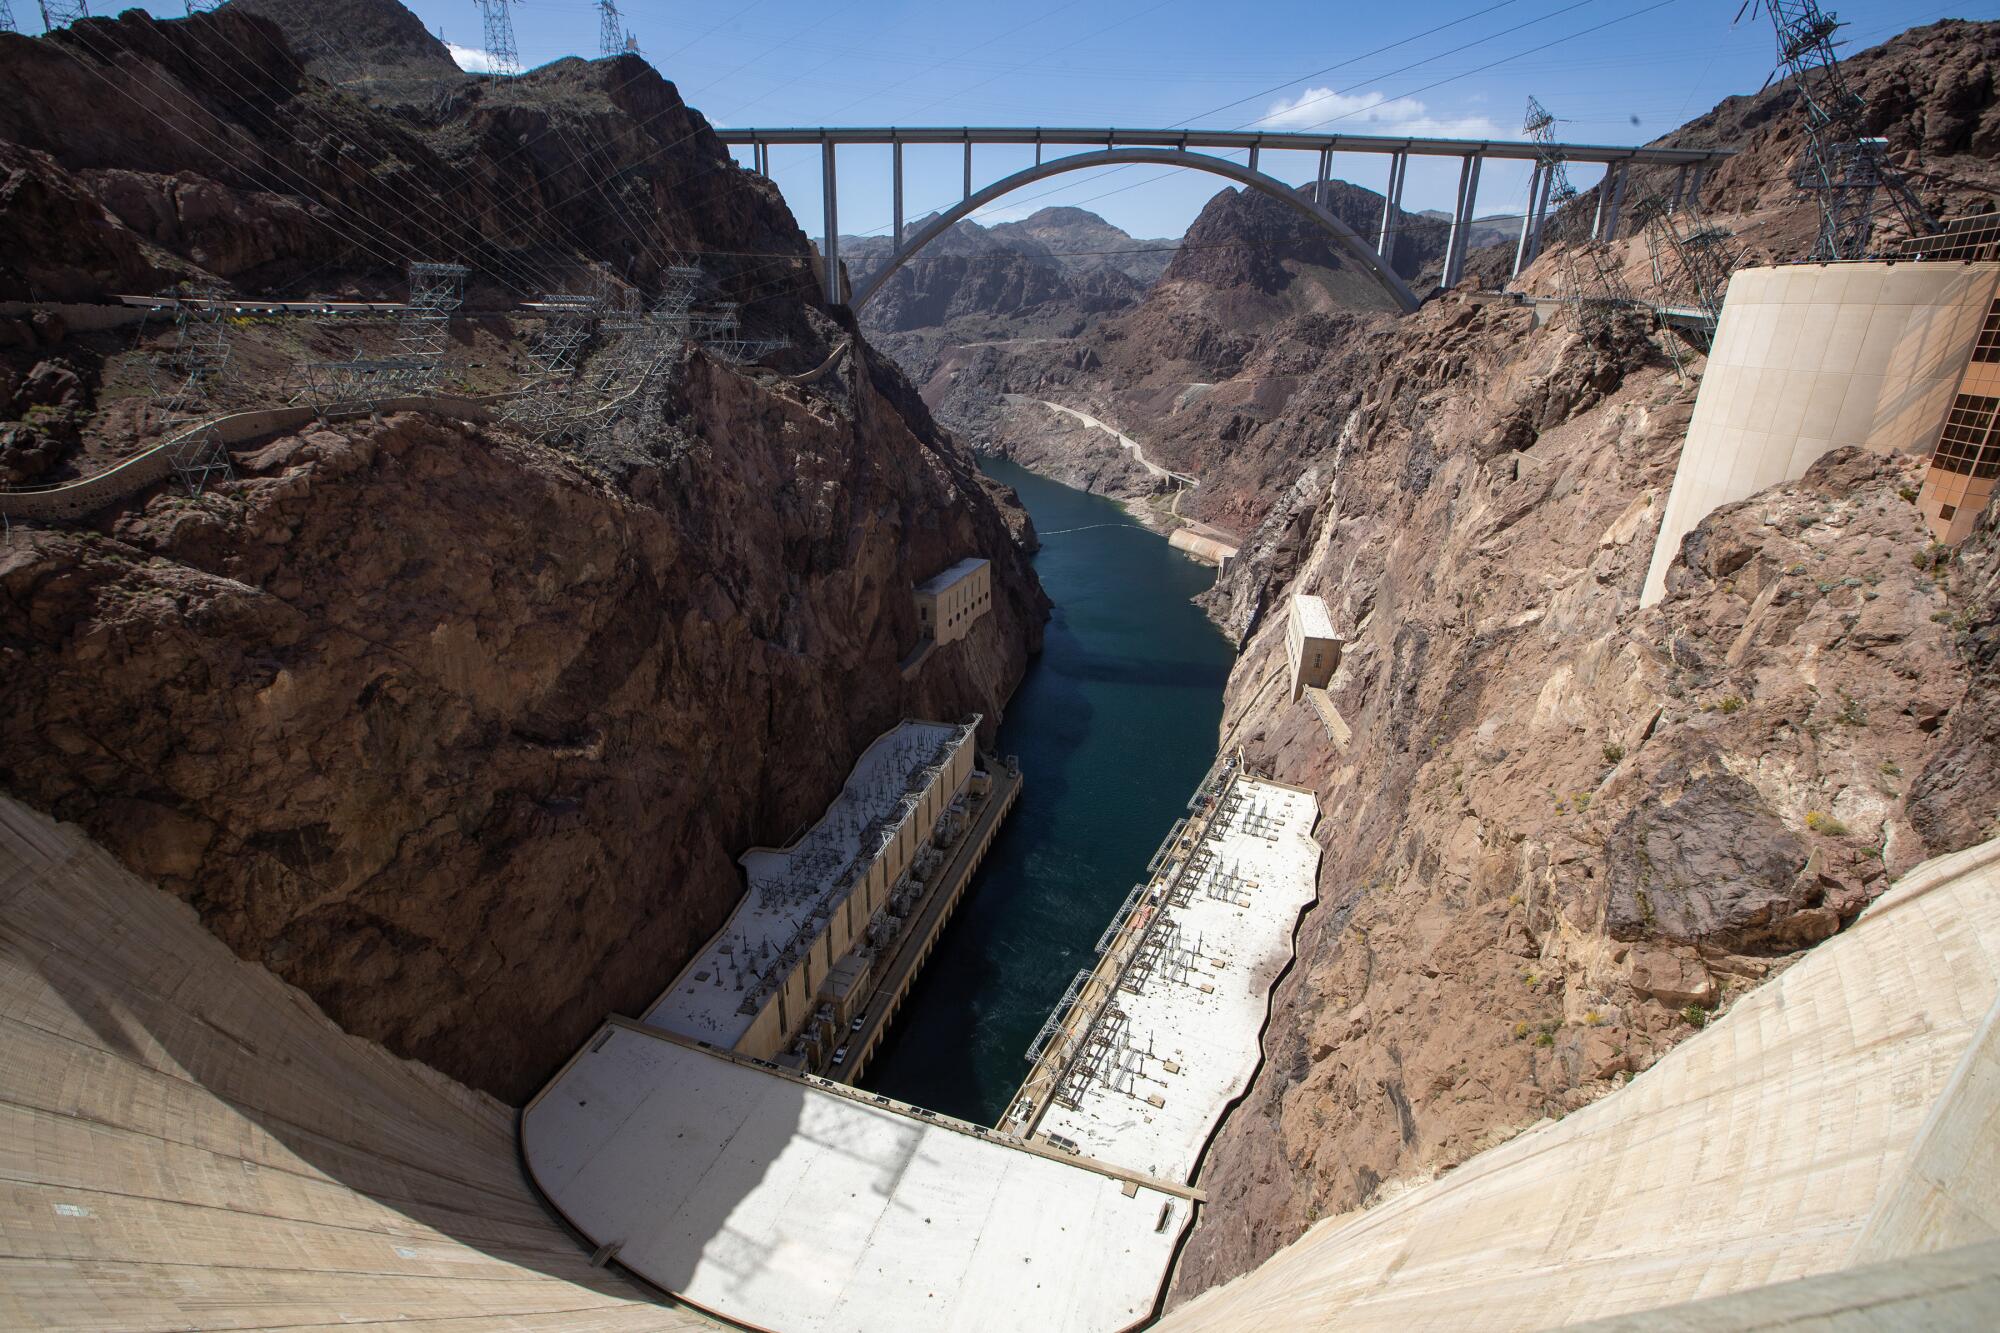 A view of the Colorado River from the top of Hoover Dam.